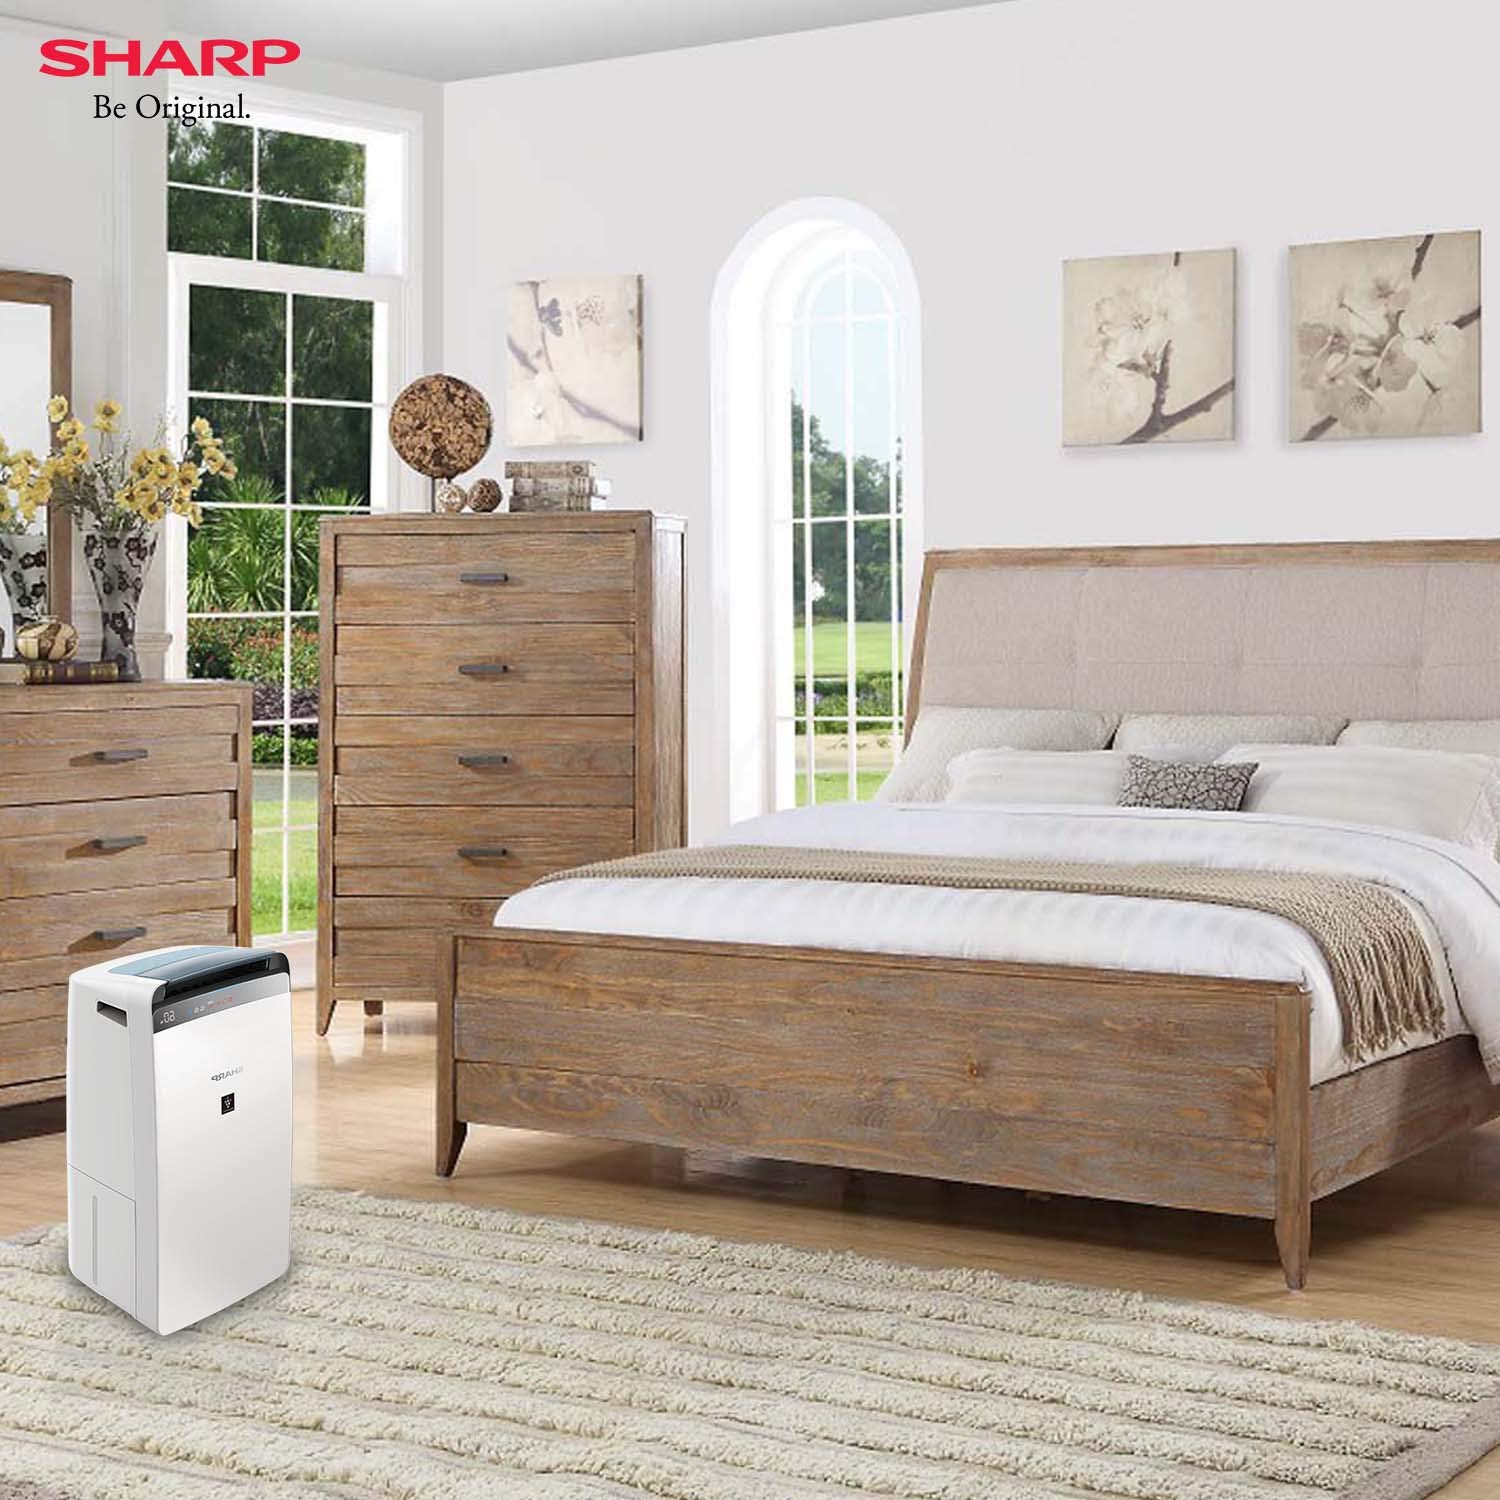 Sharp Air Purifier & Dehumidifier for Homes, Rooms, Offices | Awarded Plasmacluster Tech. | True HEPA H14 (in E1822 type) & Activated Carbon Filter | Auto Dehumidification | PM2.5 Indicator | Model: DW-J20FM-W